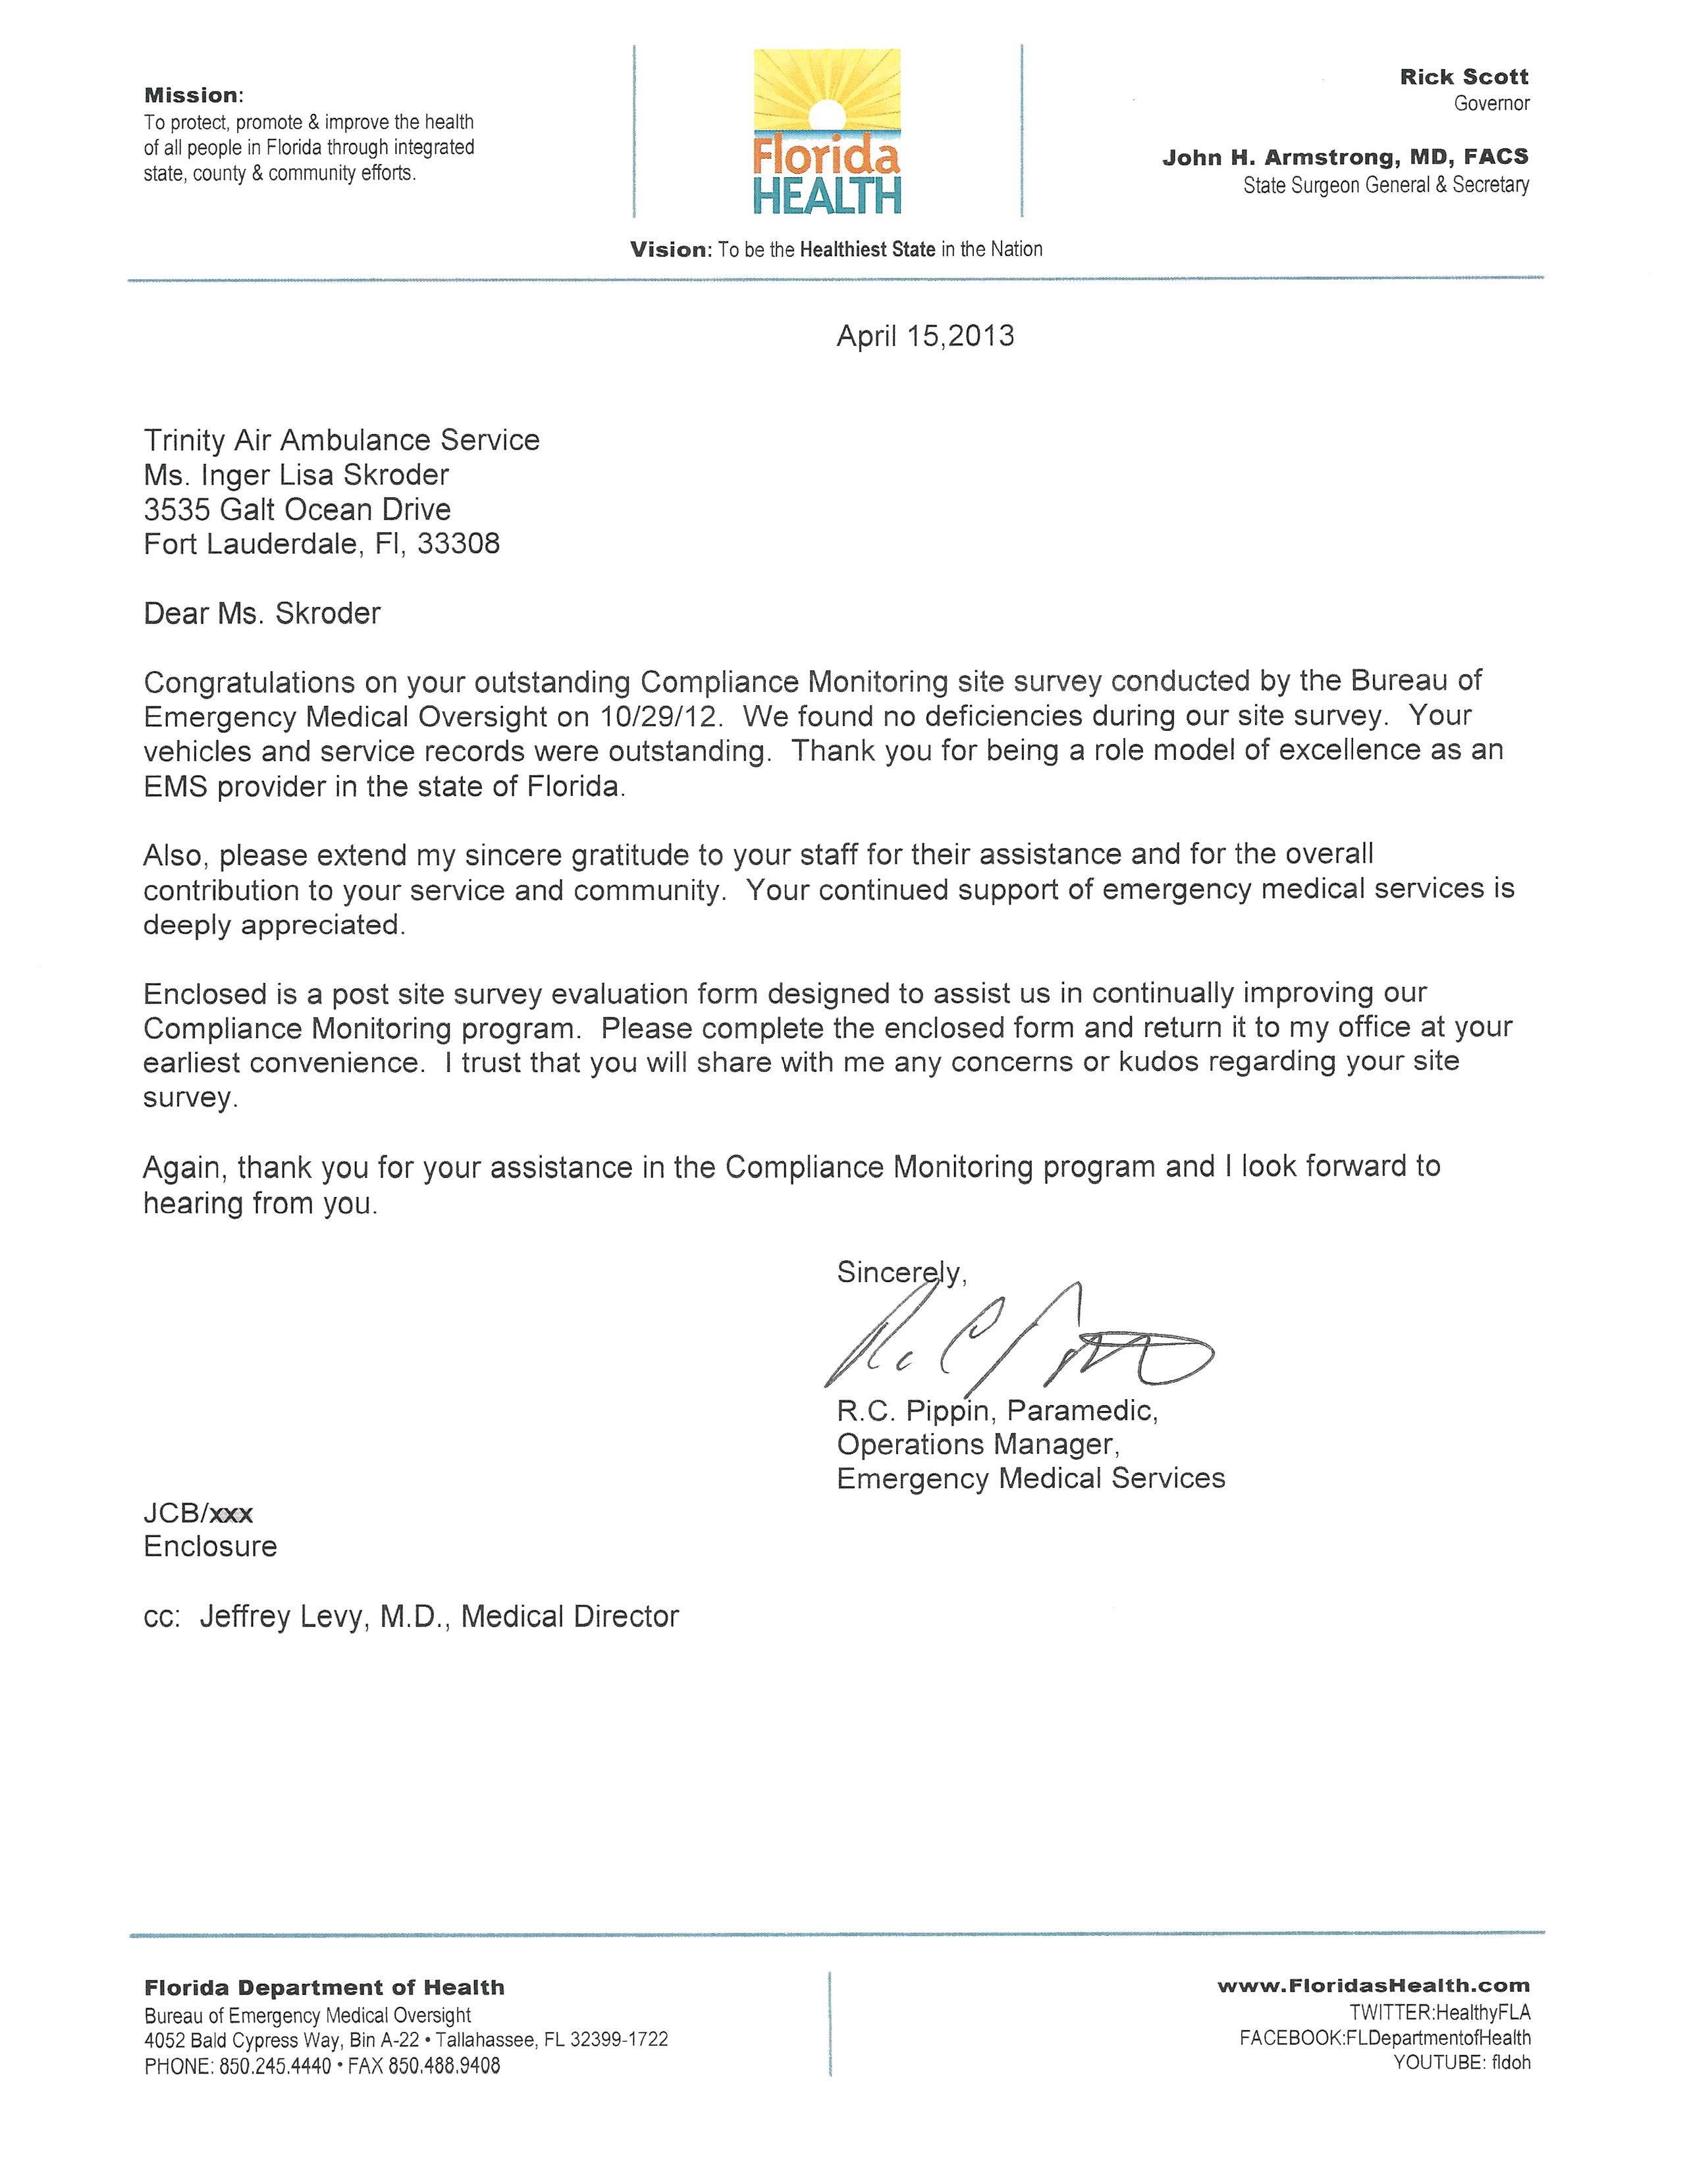 Trinity Air Ambulance International - Outstanding Compliance Letter